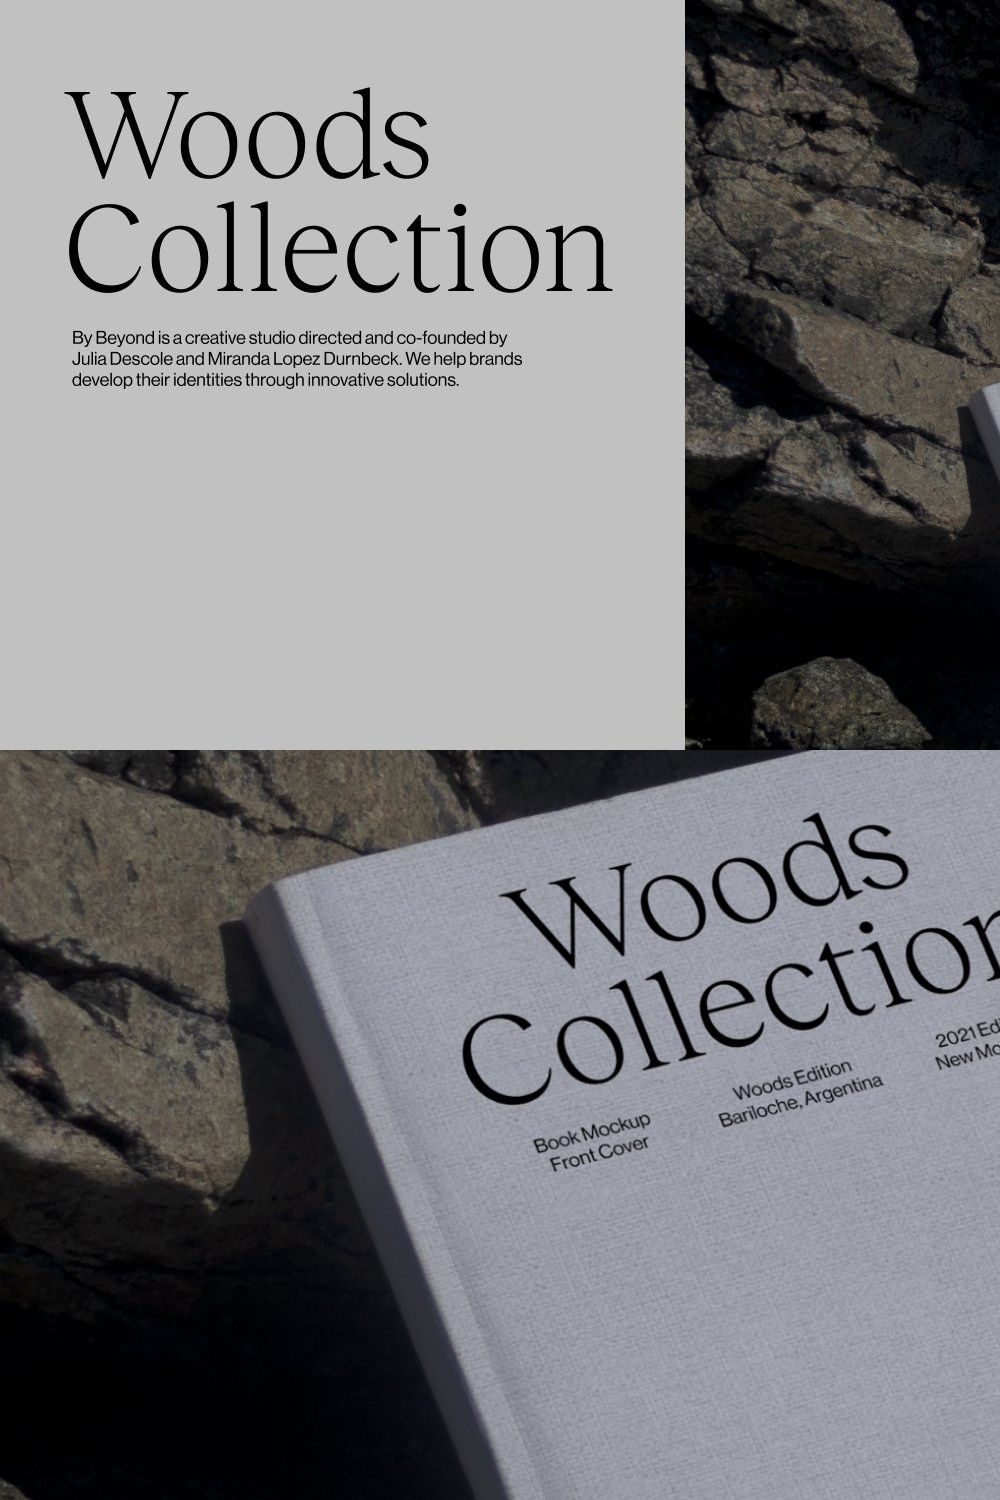 Woods Collection Book Cover Mockup 2 pinterest preview image.